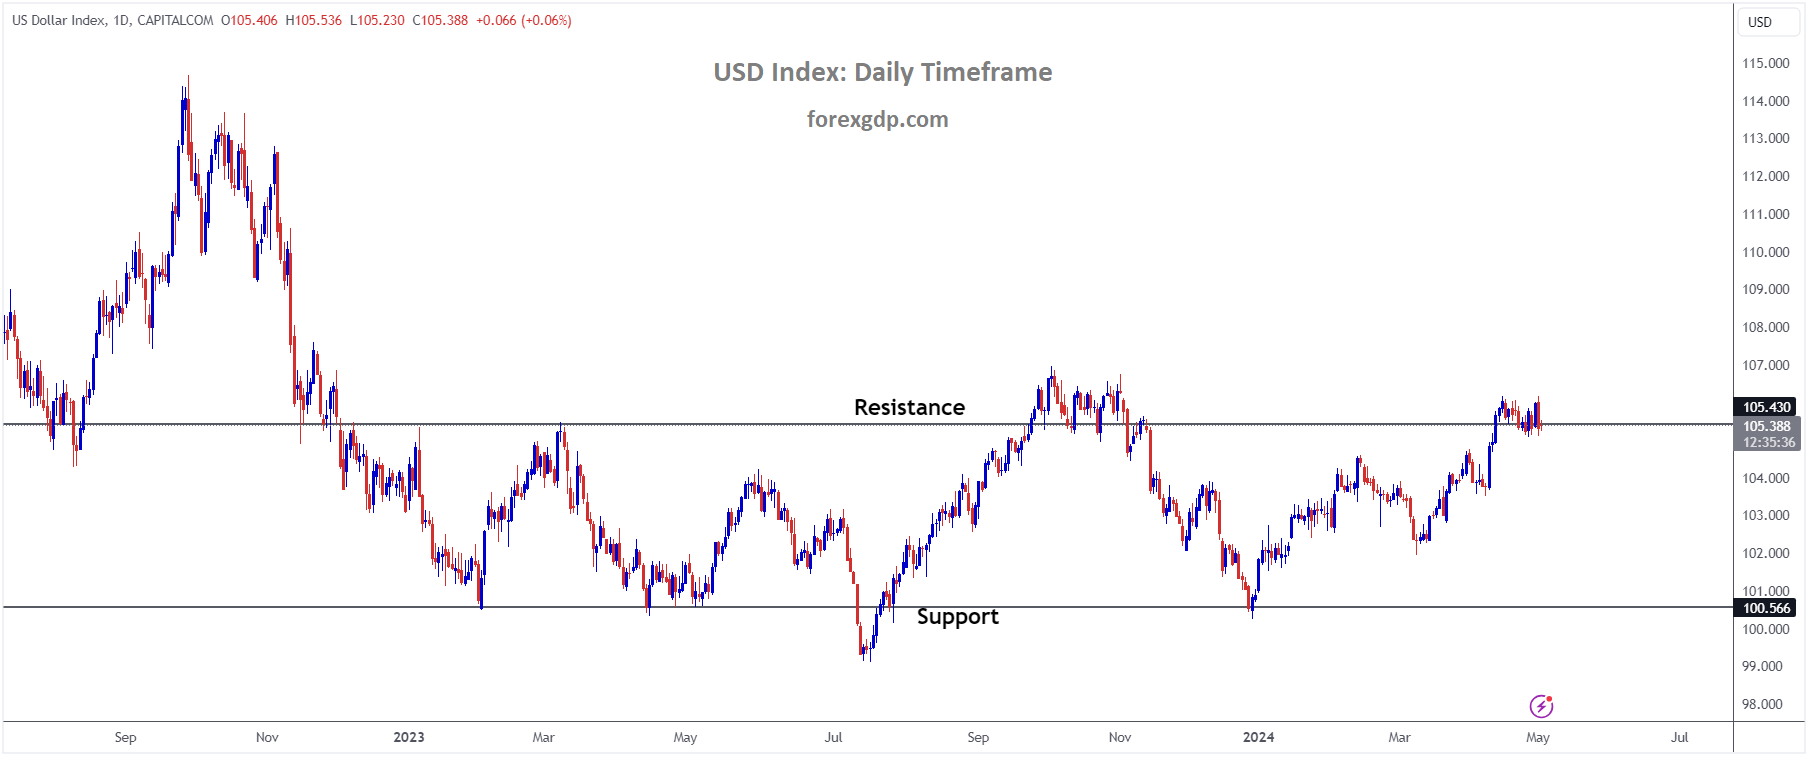 USD Index is moving in the Box pattern and the market has reached the resistance area of the pattern